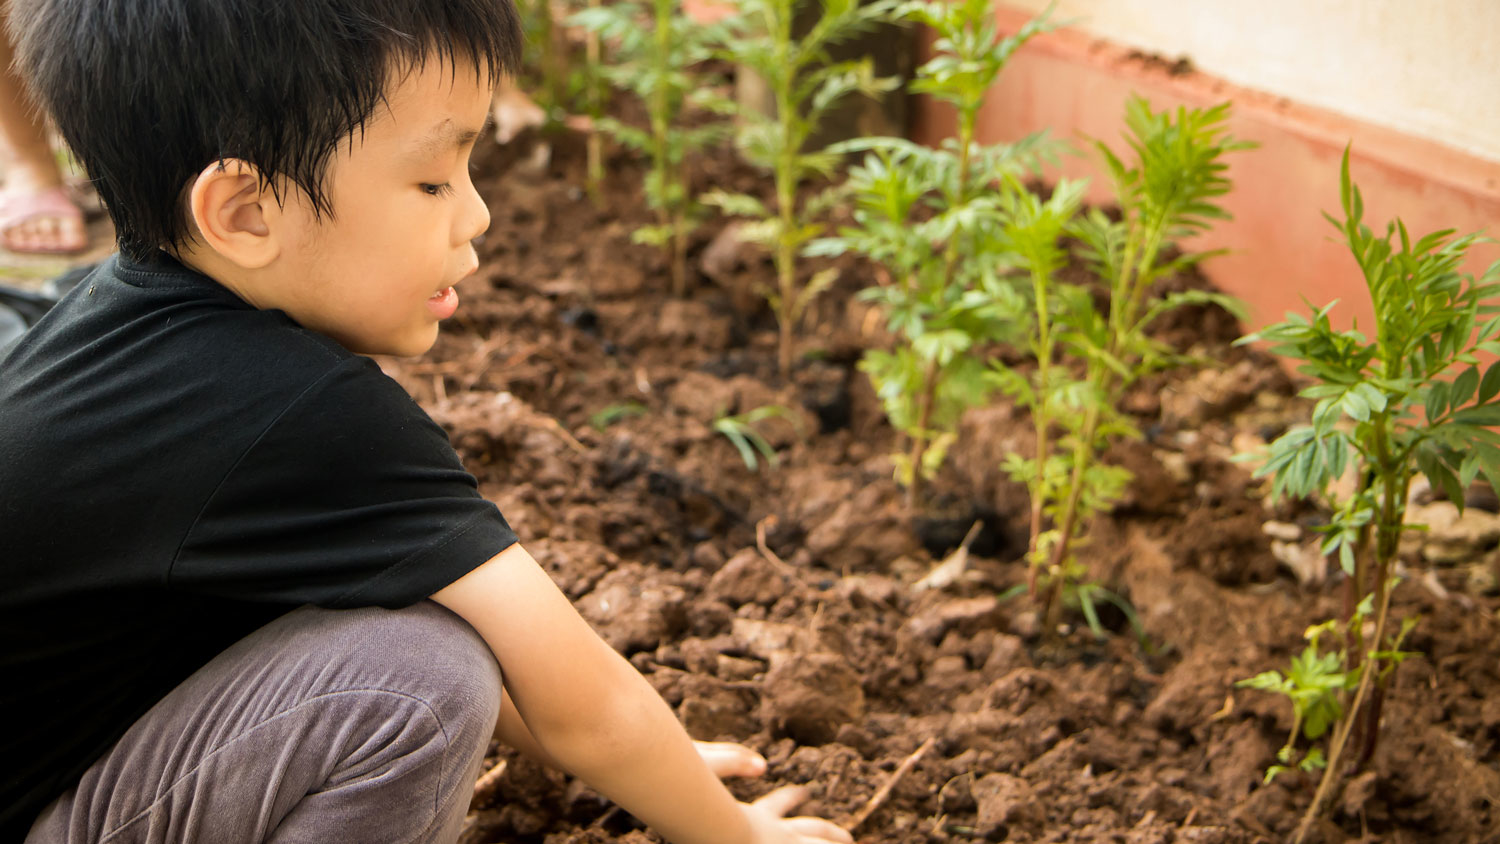 A young boy in a garden planting greens